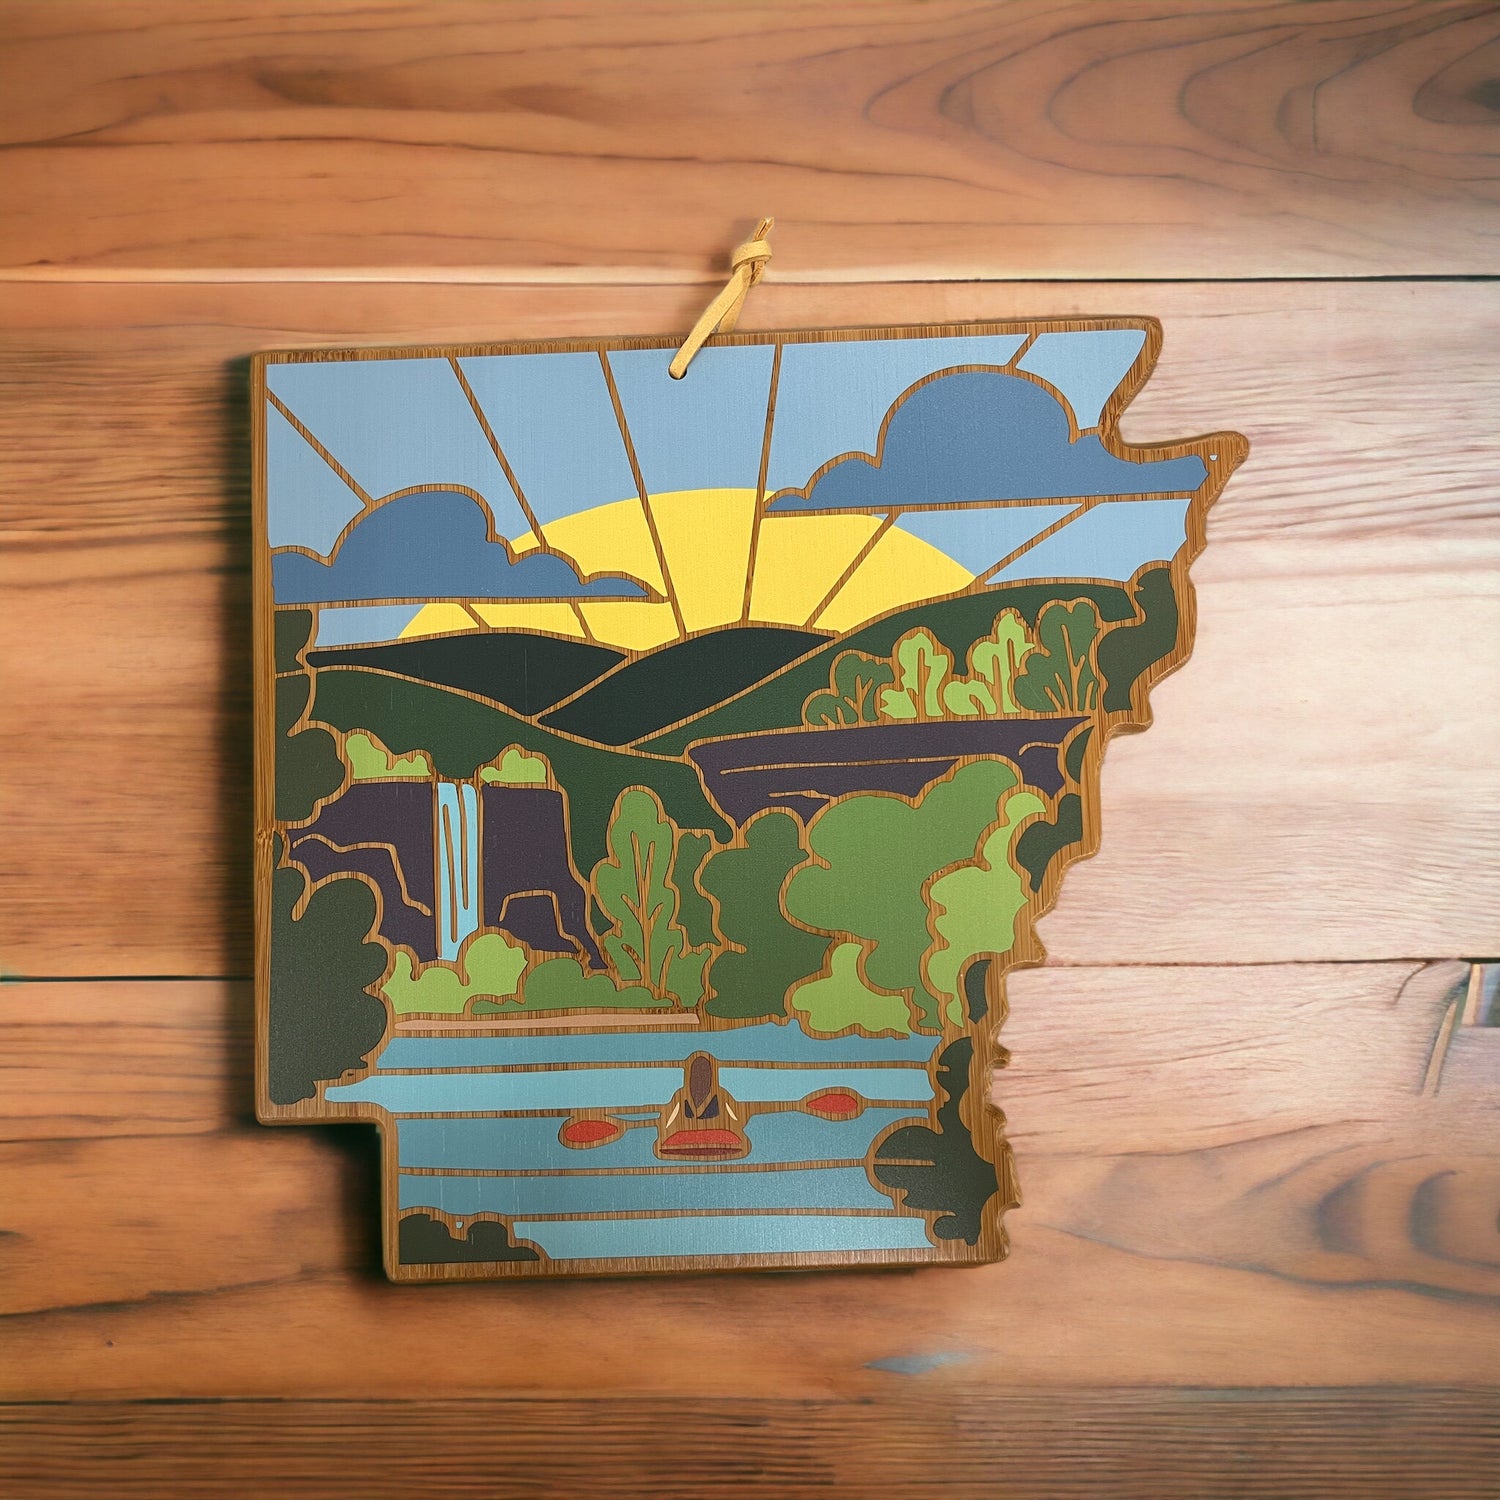 Arkansas Cutting Board with Artwork By Summer Stokes